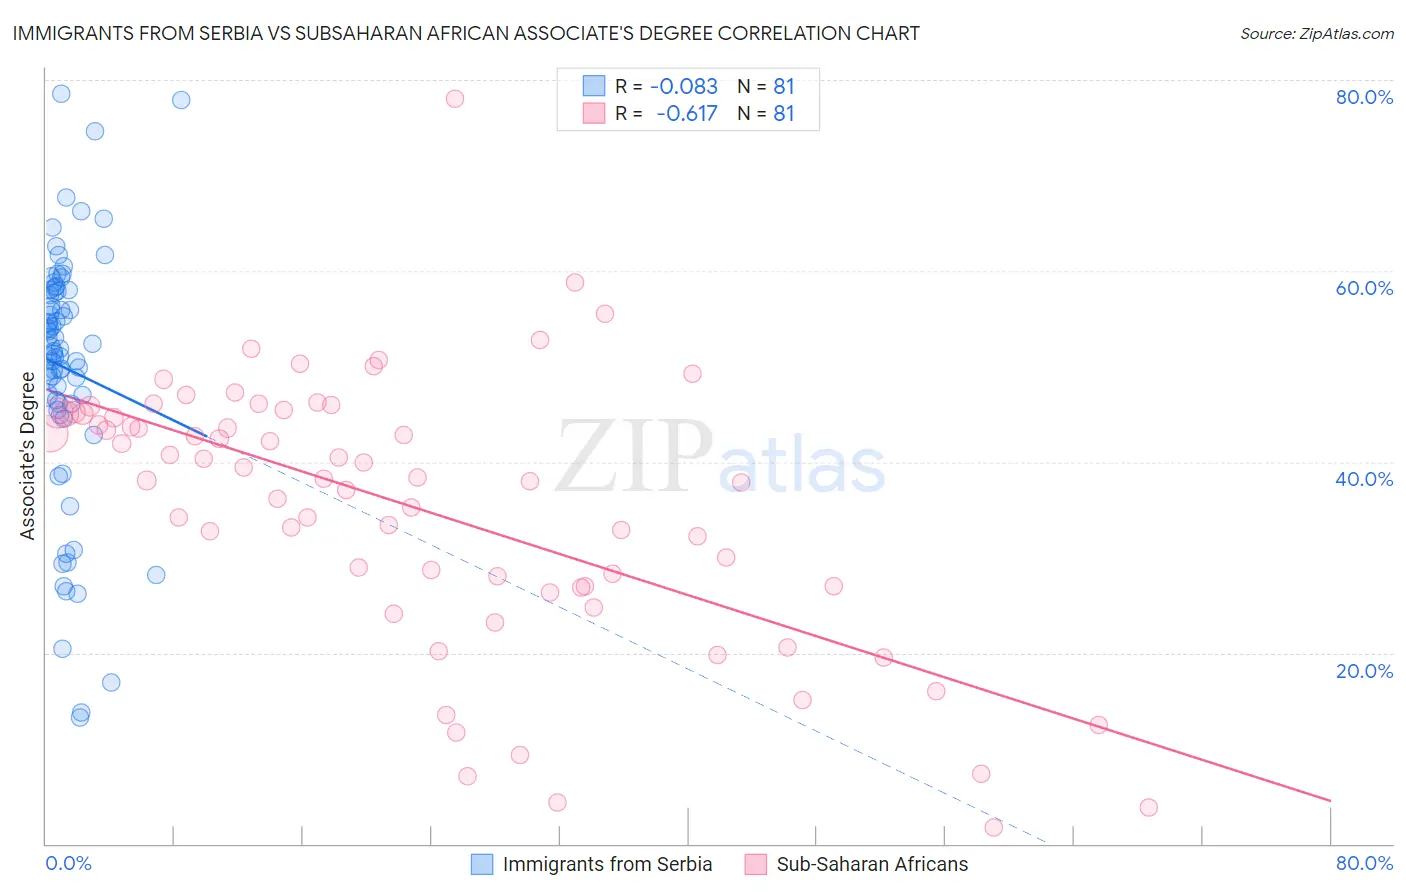 Immigrants from Serbia vs Subsaharan African Associate's Degree